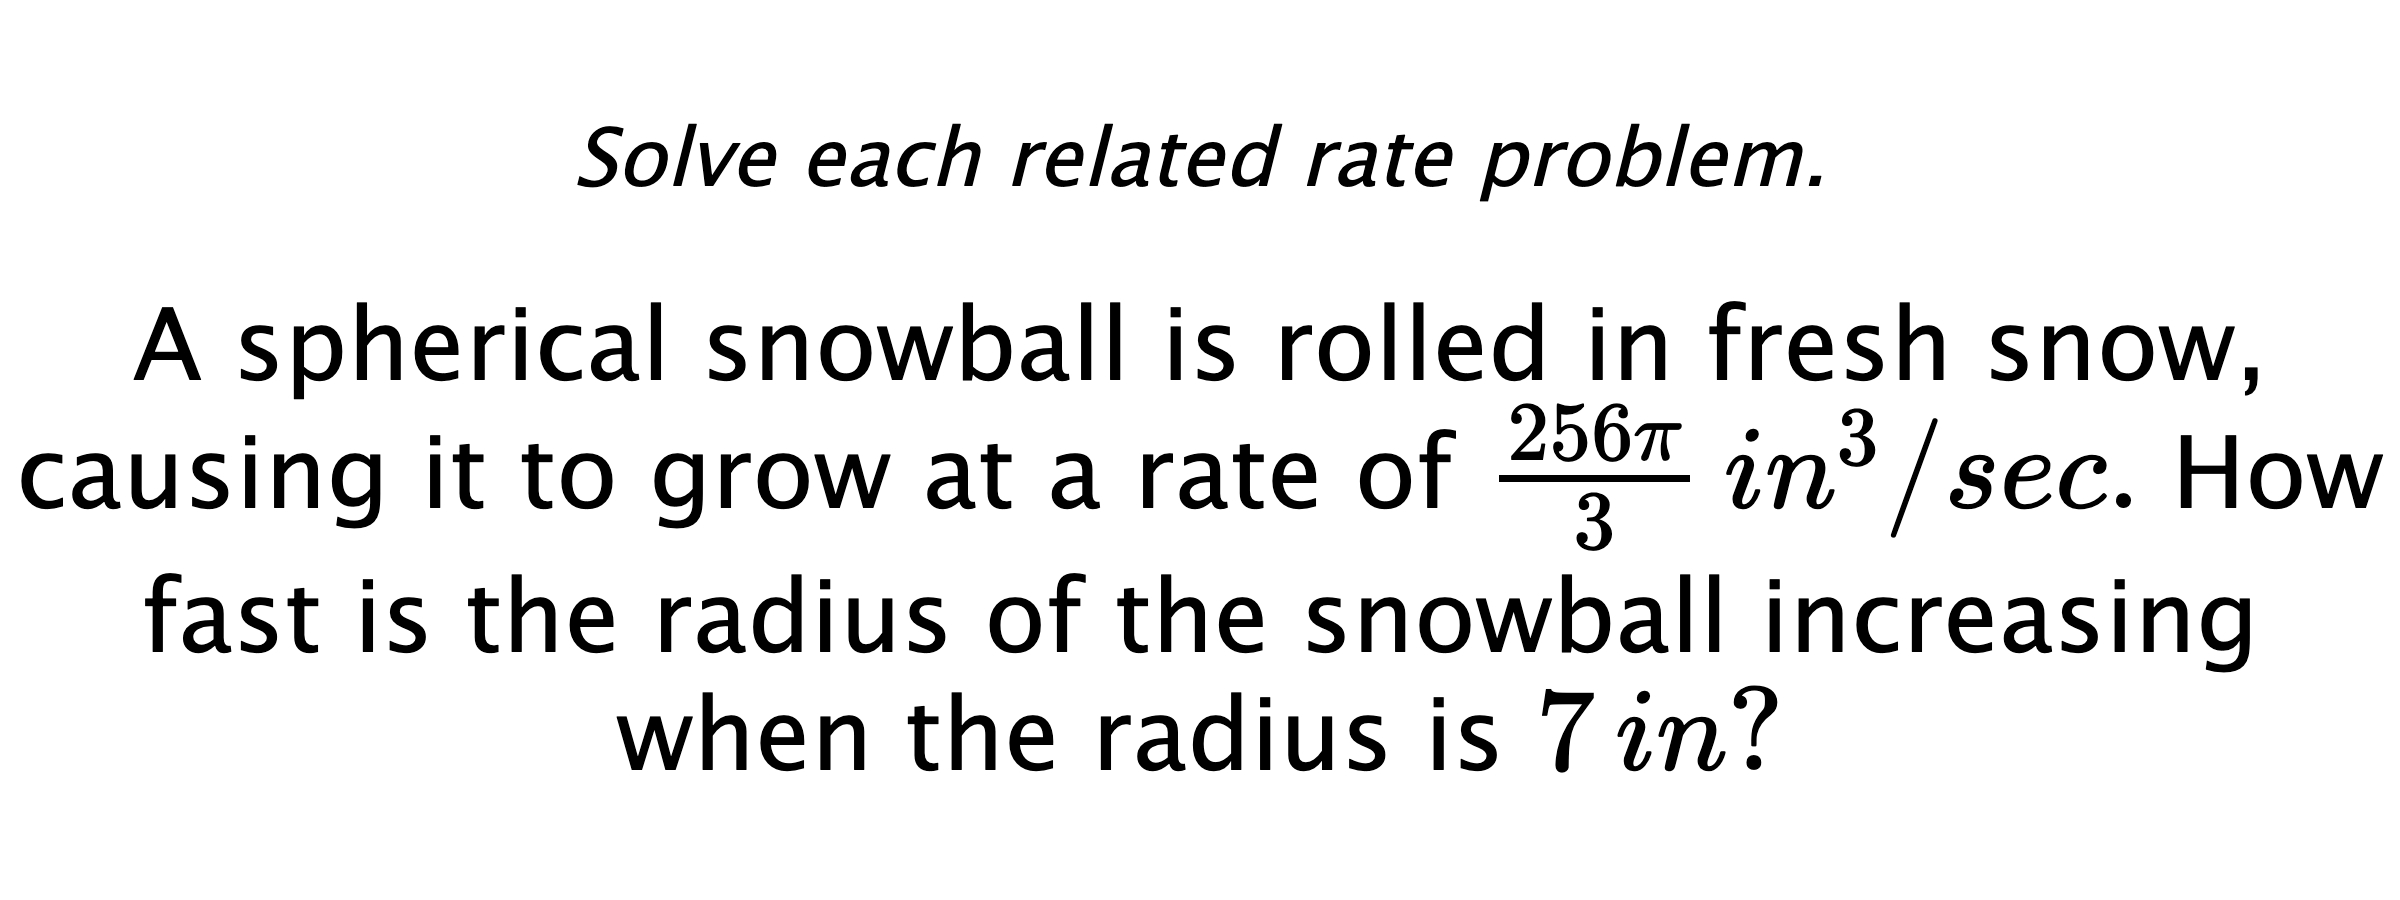 Solve each related rate problem. A spherical snowball is rolled in fresh snow, causing it to grow at a rate of $\frac{256\pi}{3} \,in^{3}/sec.$ How fast is the radius of the snowball increasing when the radius is $7\,in?$